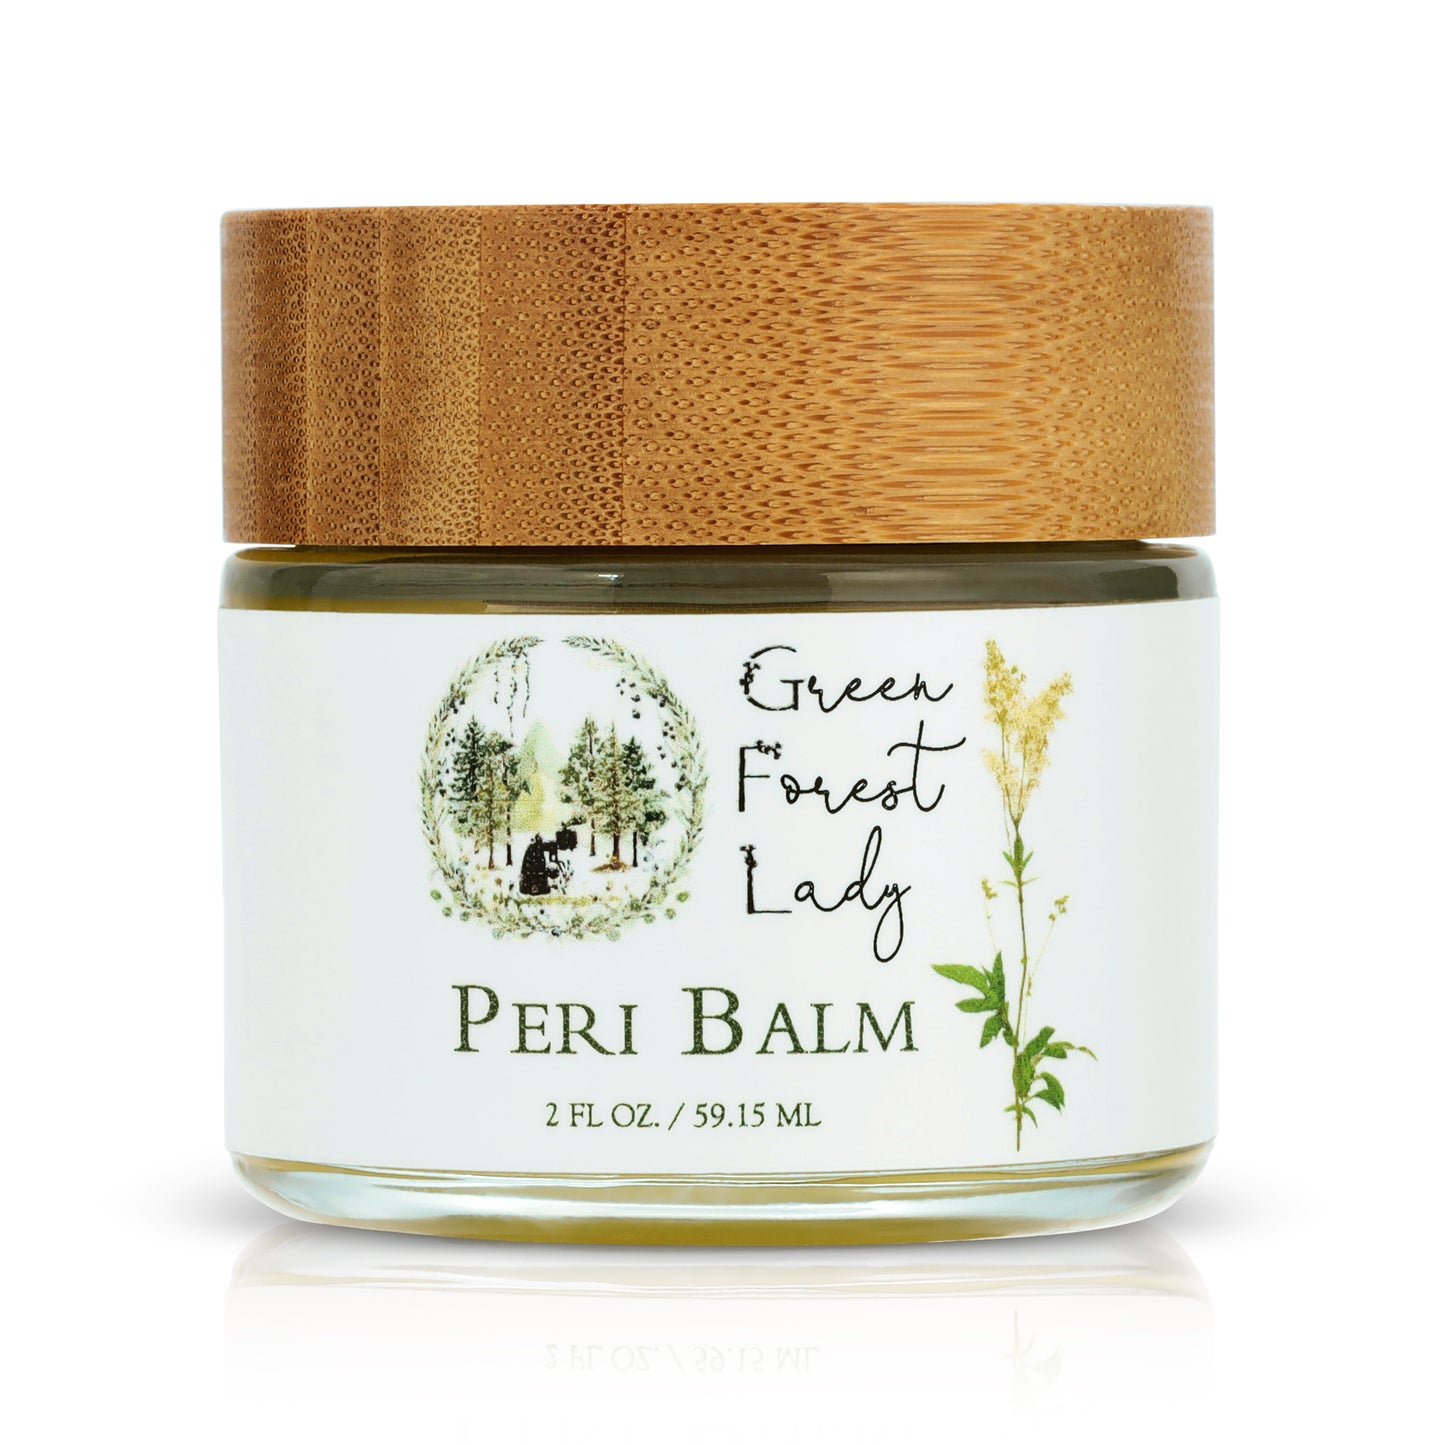 Perineum balm for pre birth and after birth